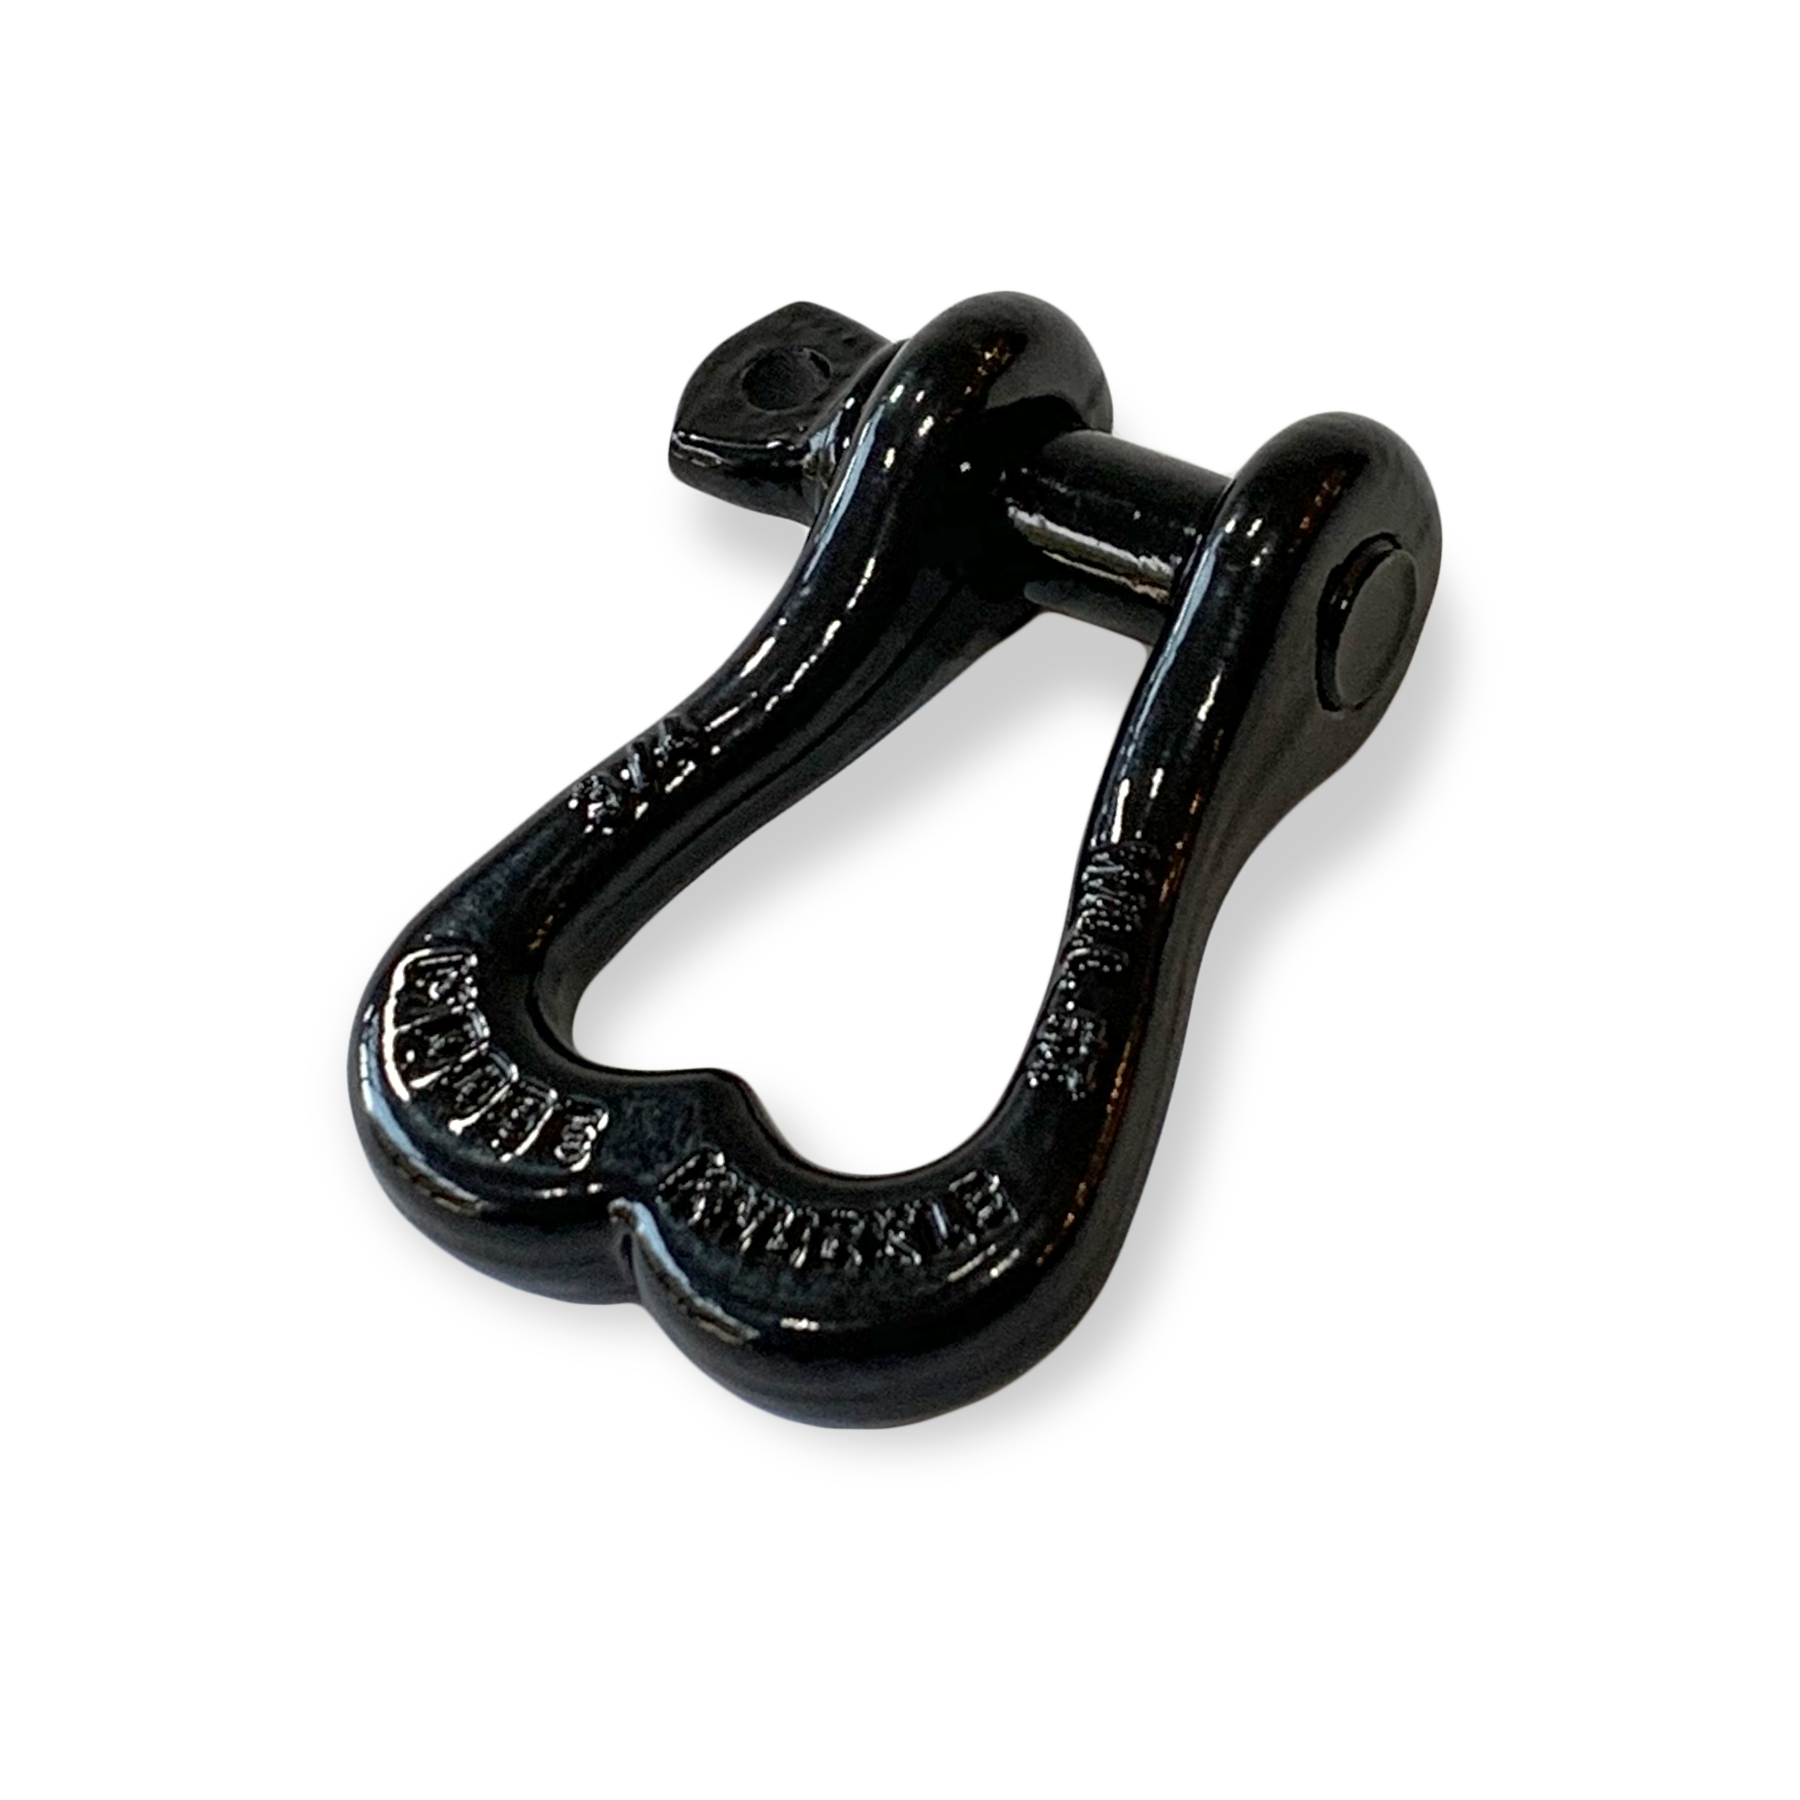 Moose Knuckle XL Black Hole Powder Coated Colored Shackle for Tow Straps, Off Roading and Truck Nuts Vehicle Recovery